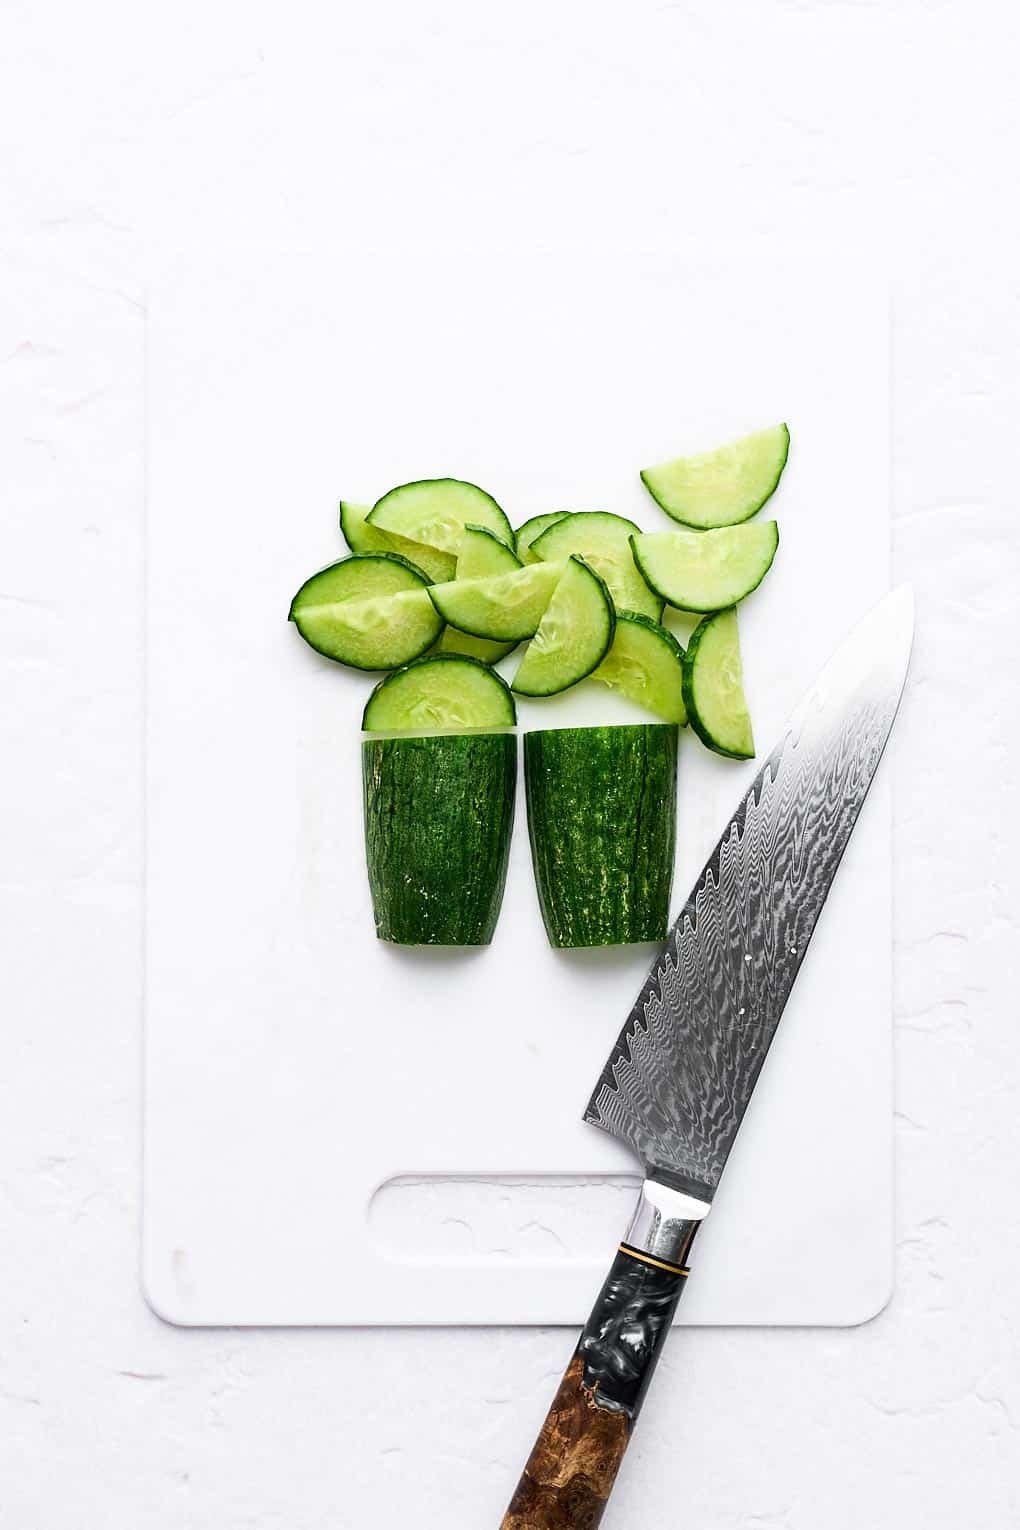 Cutting a cucumber into half moons.